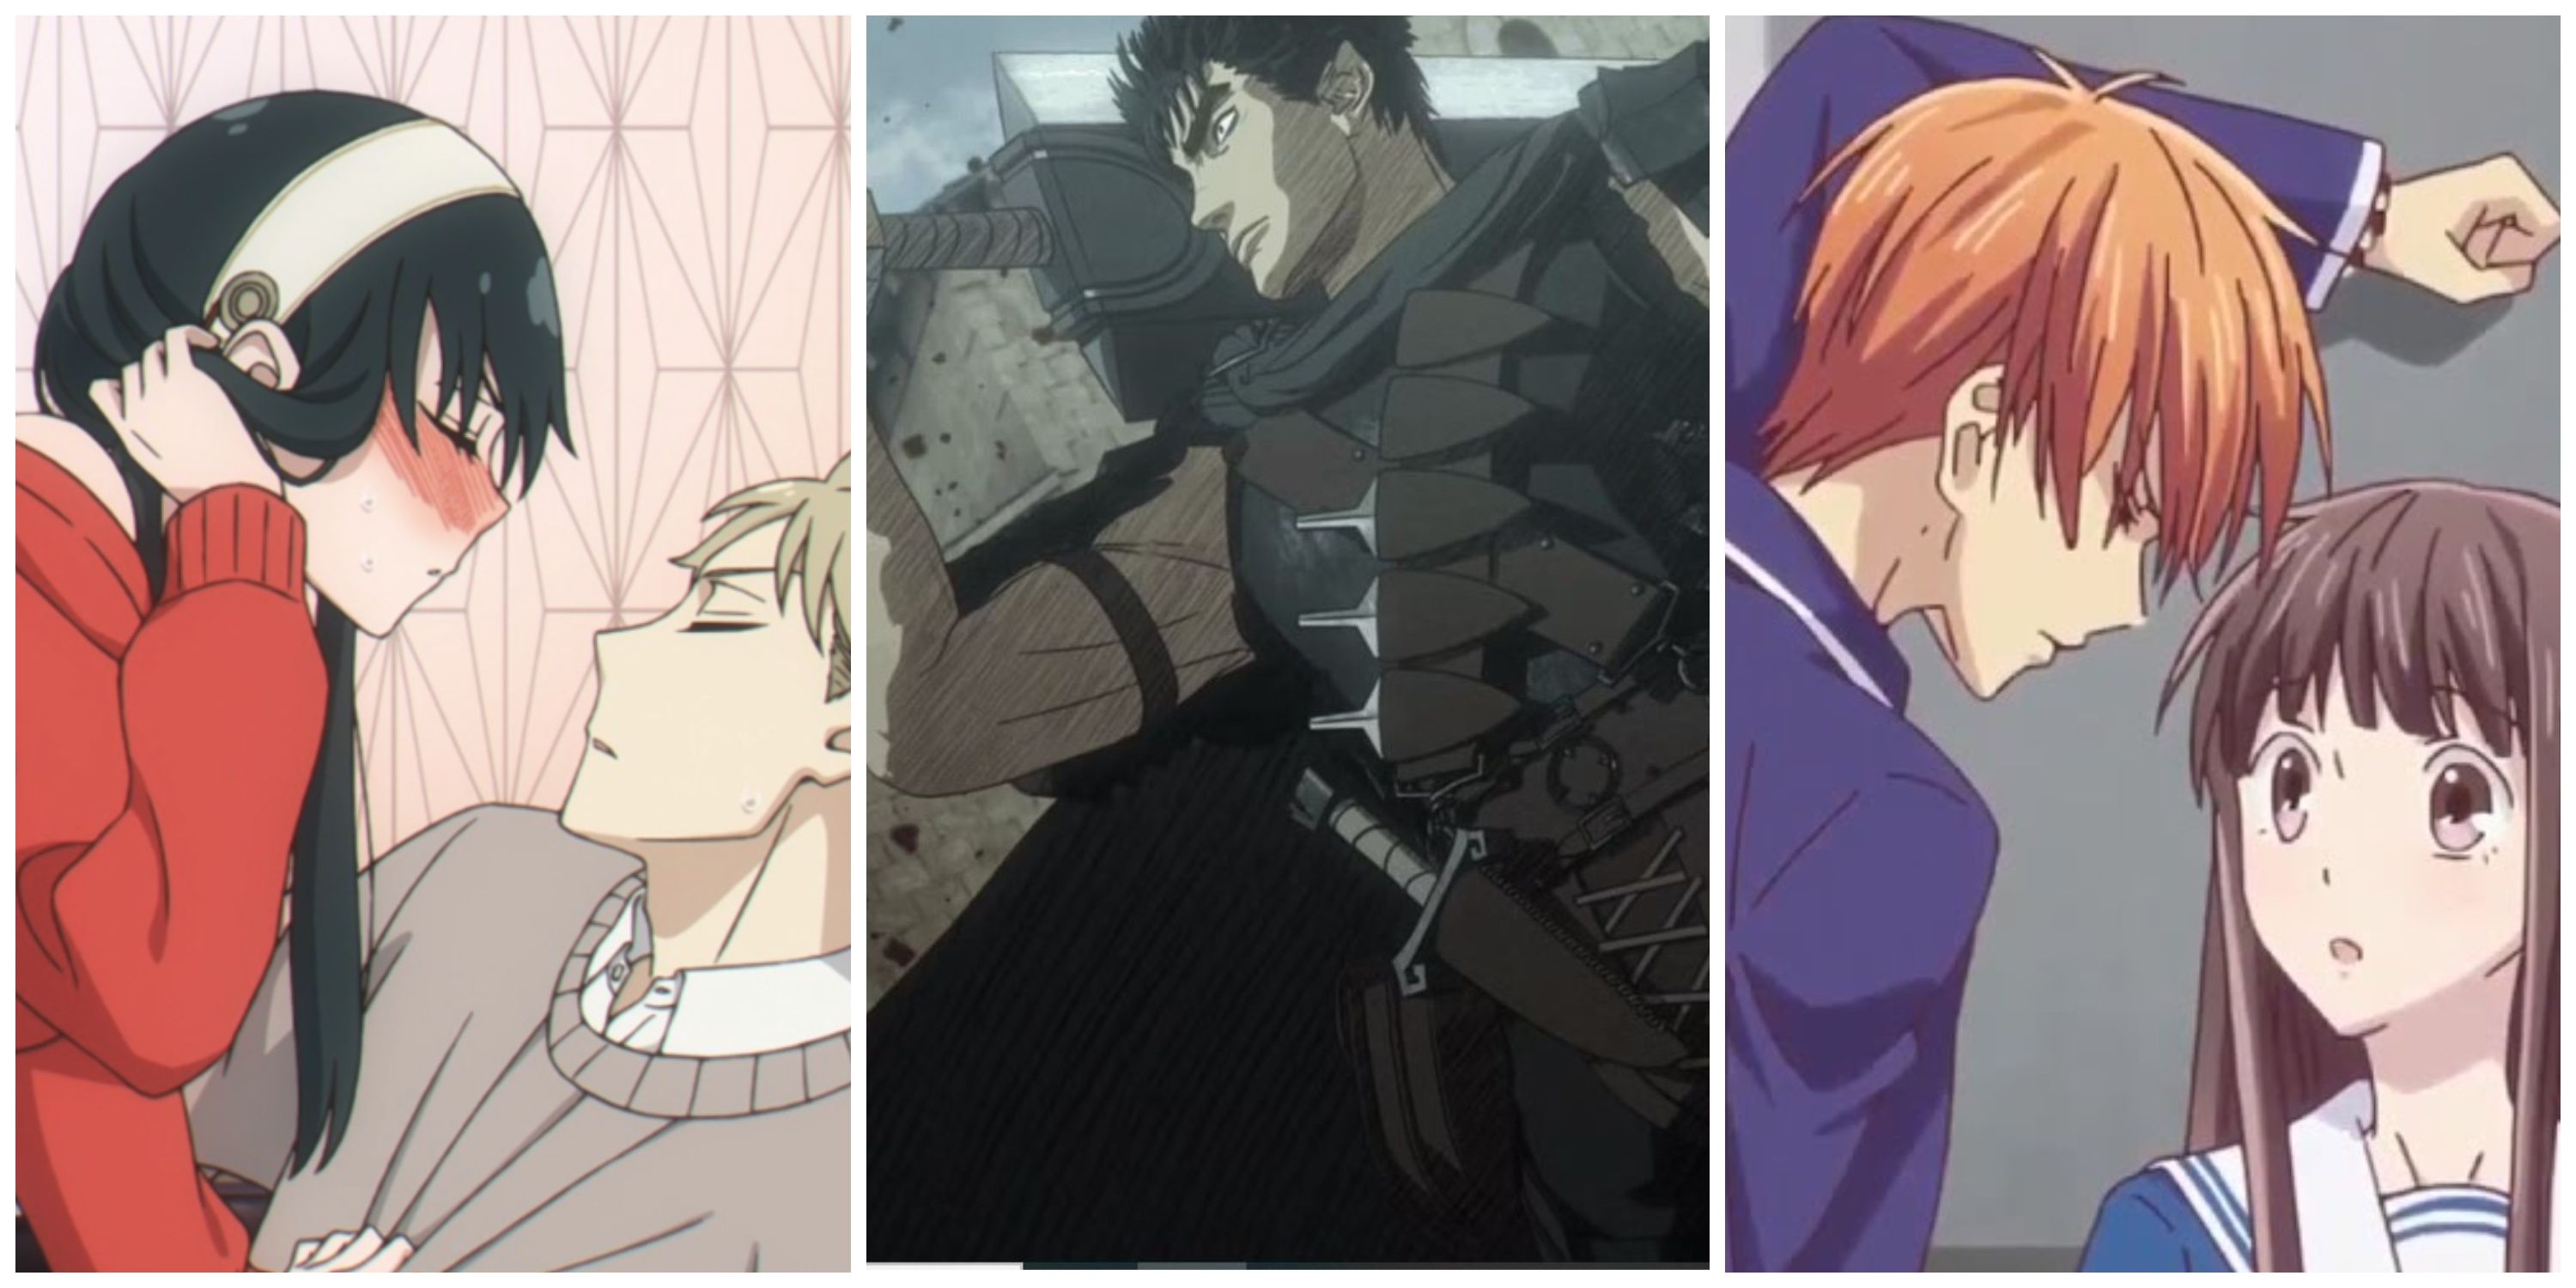 Split image, Loid and Yor almost kissing in Spy x Family, Guts holding Dragon Slayer in Berserk, Kyo protecting Tohru in Fruits Basket.